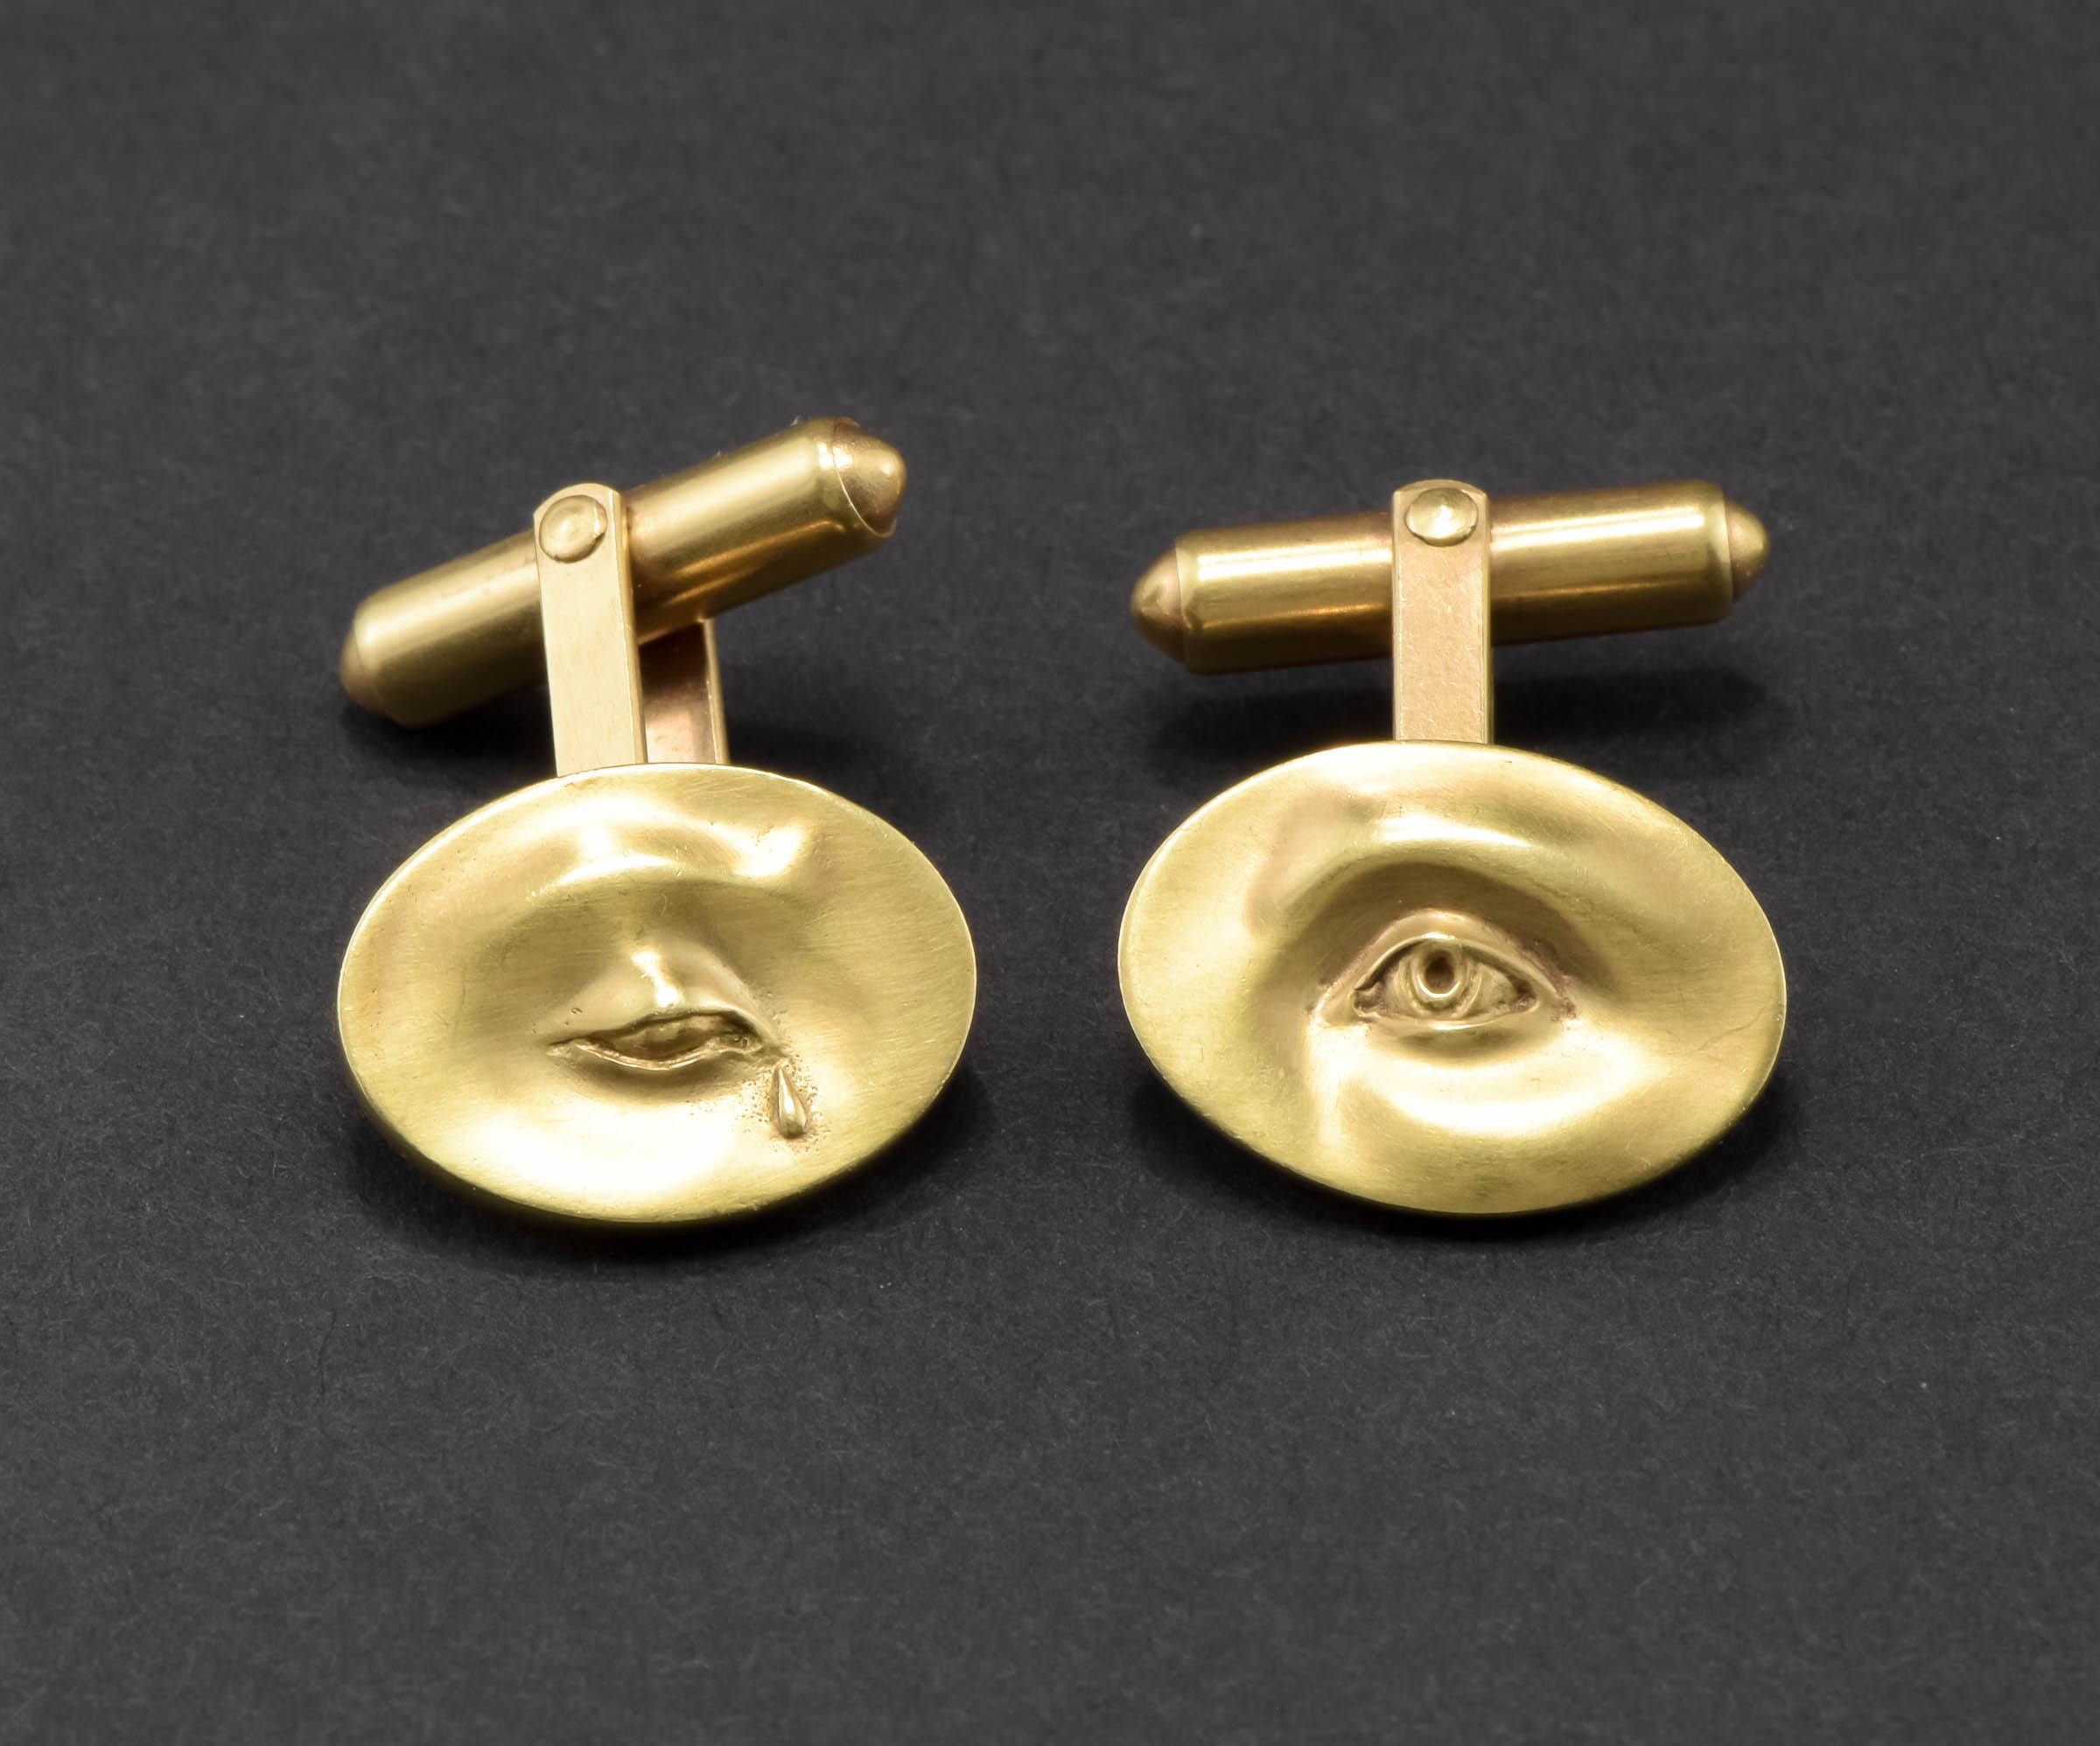 Beautifully made and incredibly hard to find, this wonderful pair of 14K gold cufflinks was made by the talented American jeweler Gabriella Kiss.  They are part of her 